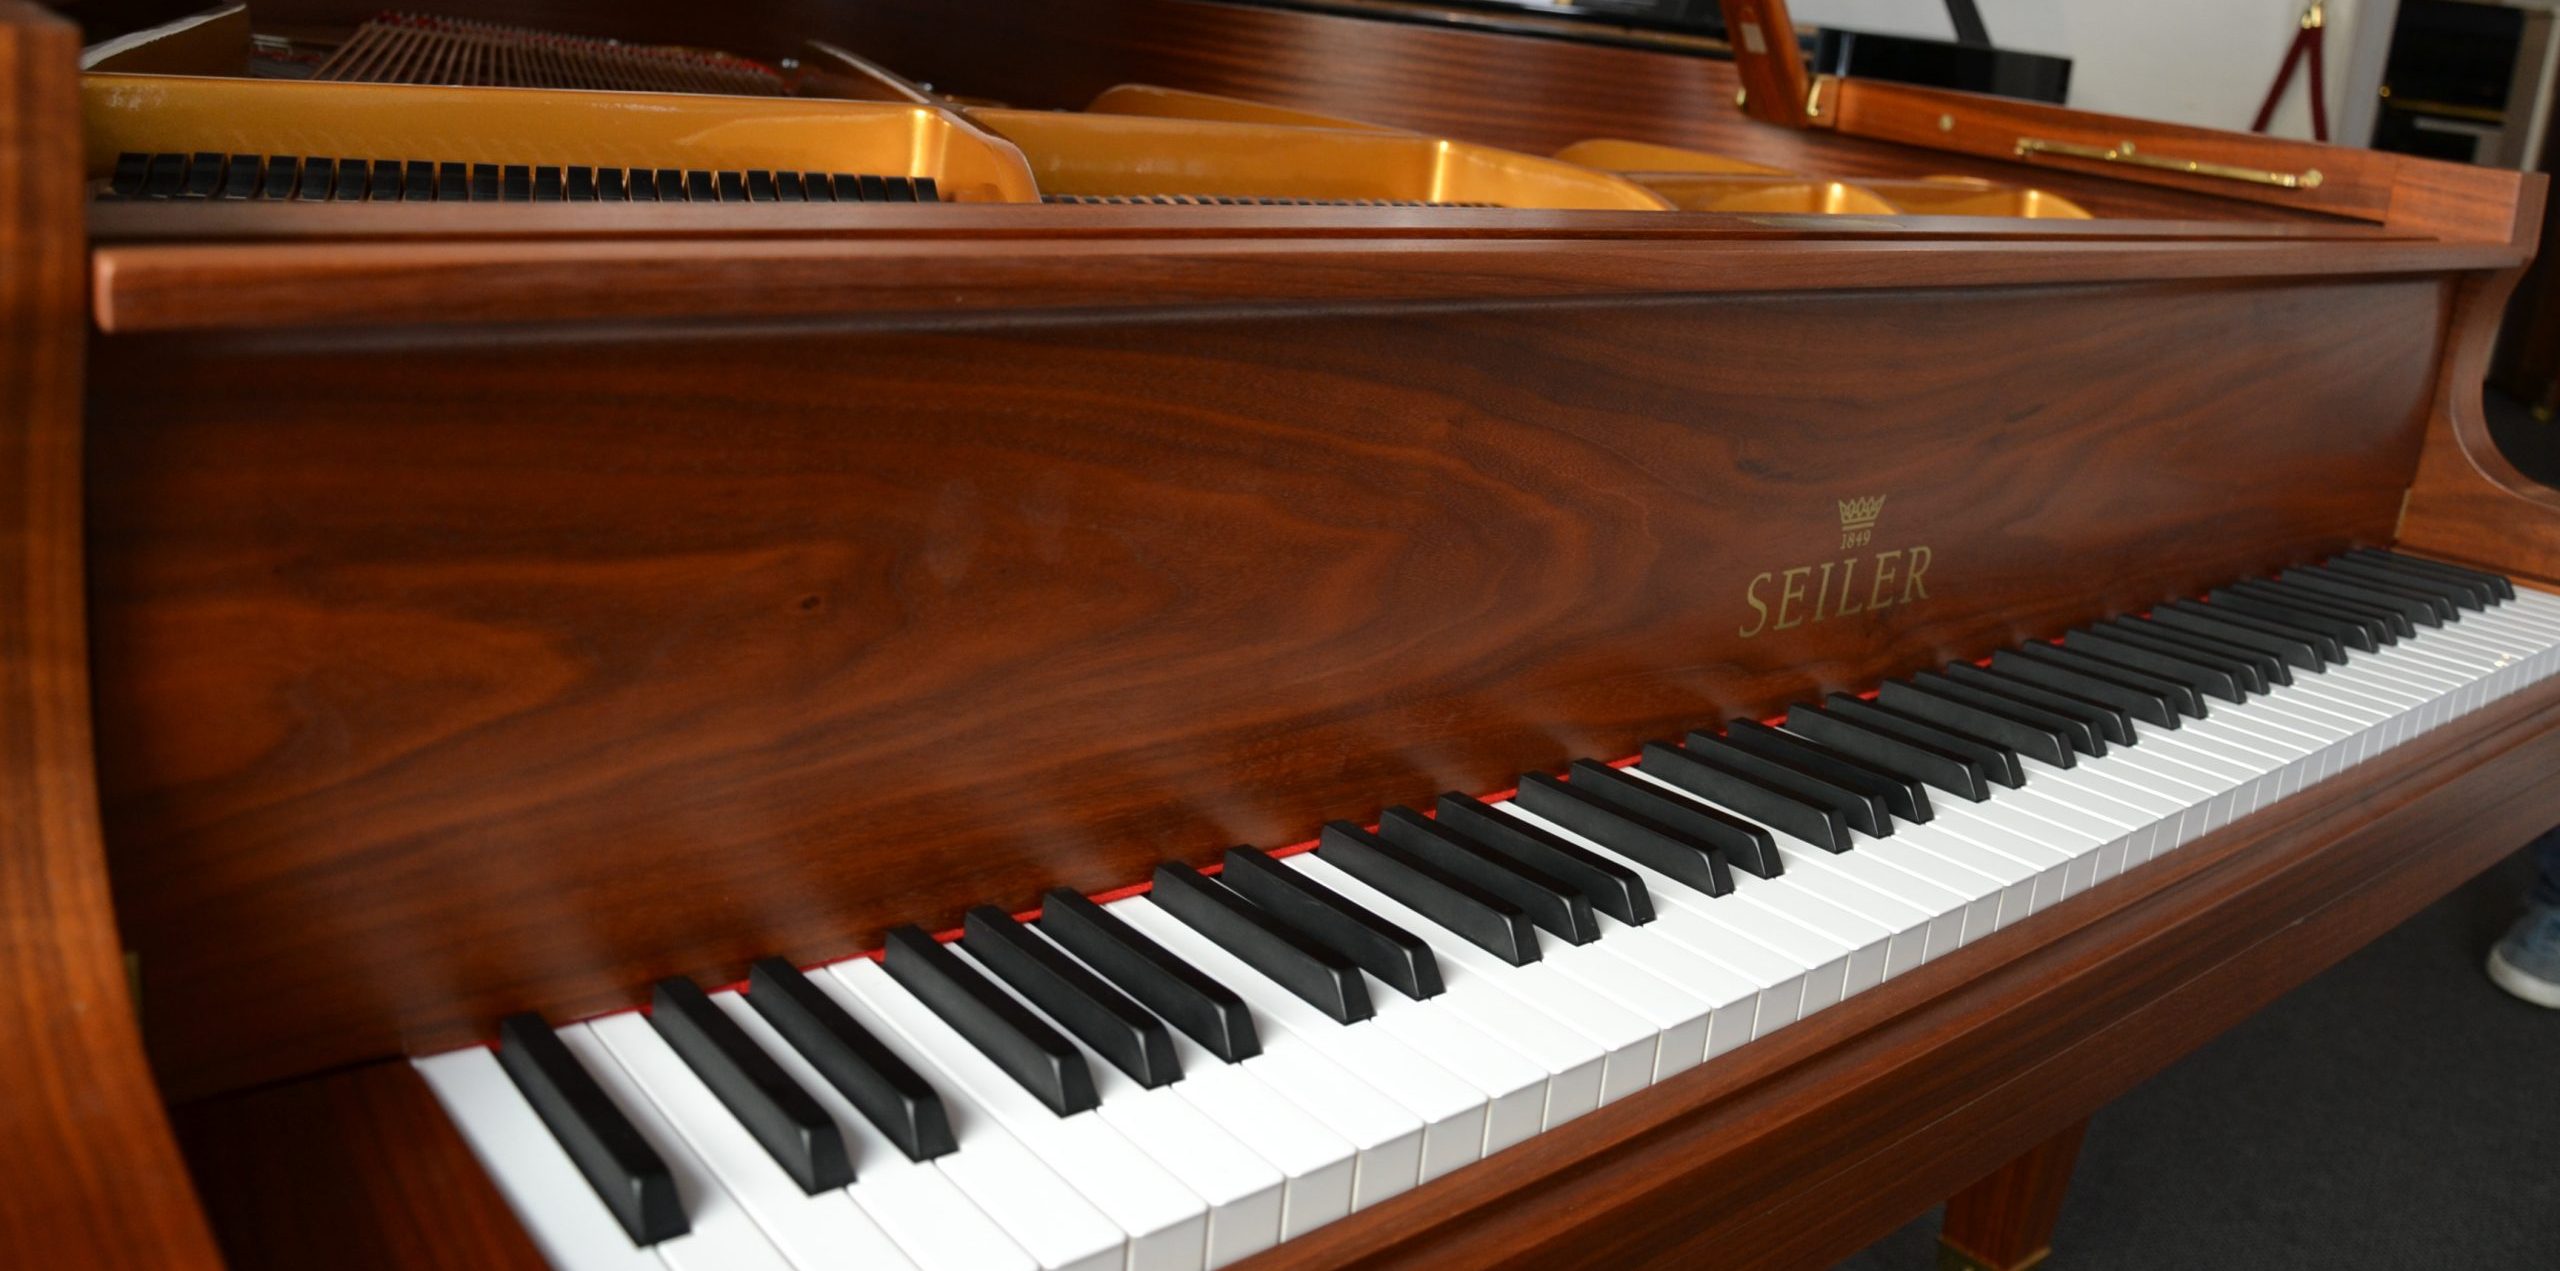 Seiler piano review: A symphony of heritage and craftsmanship